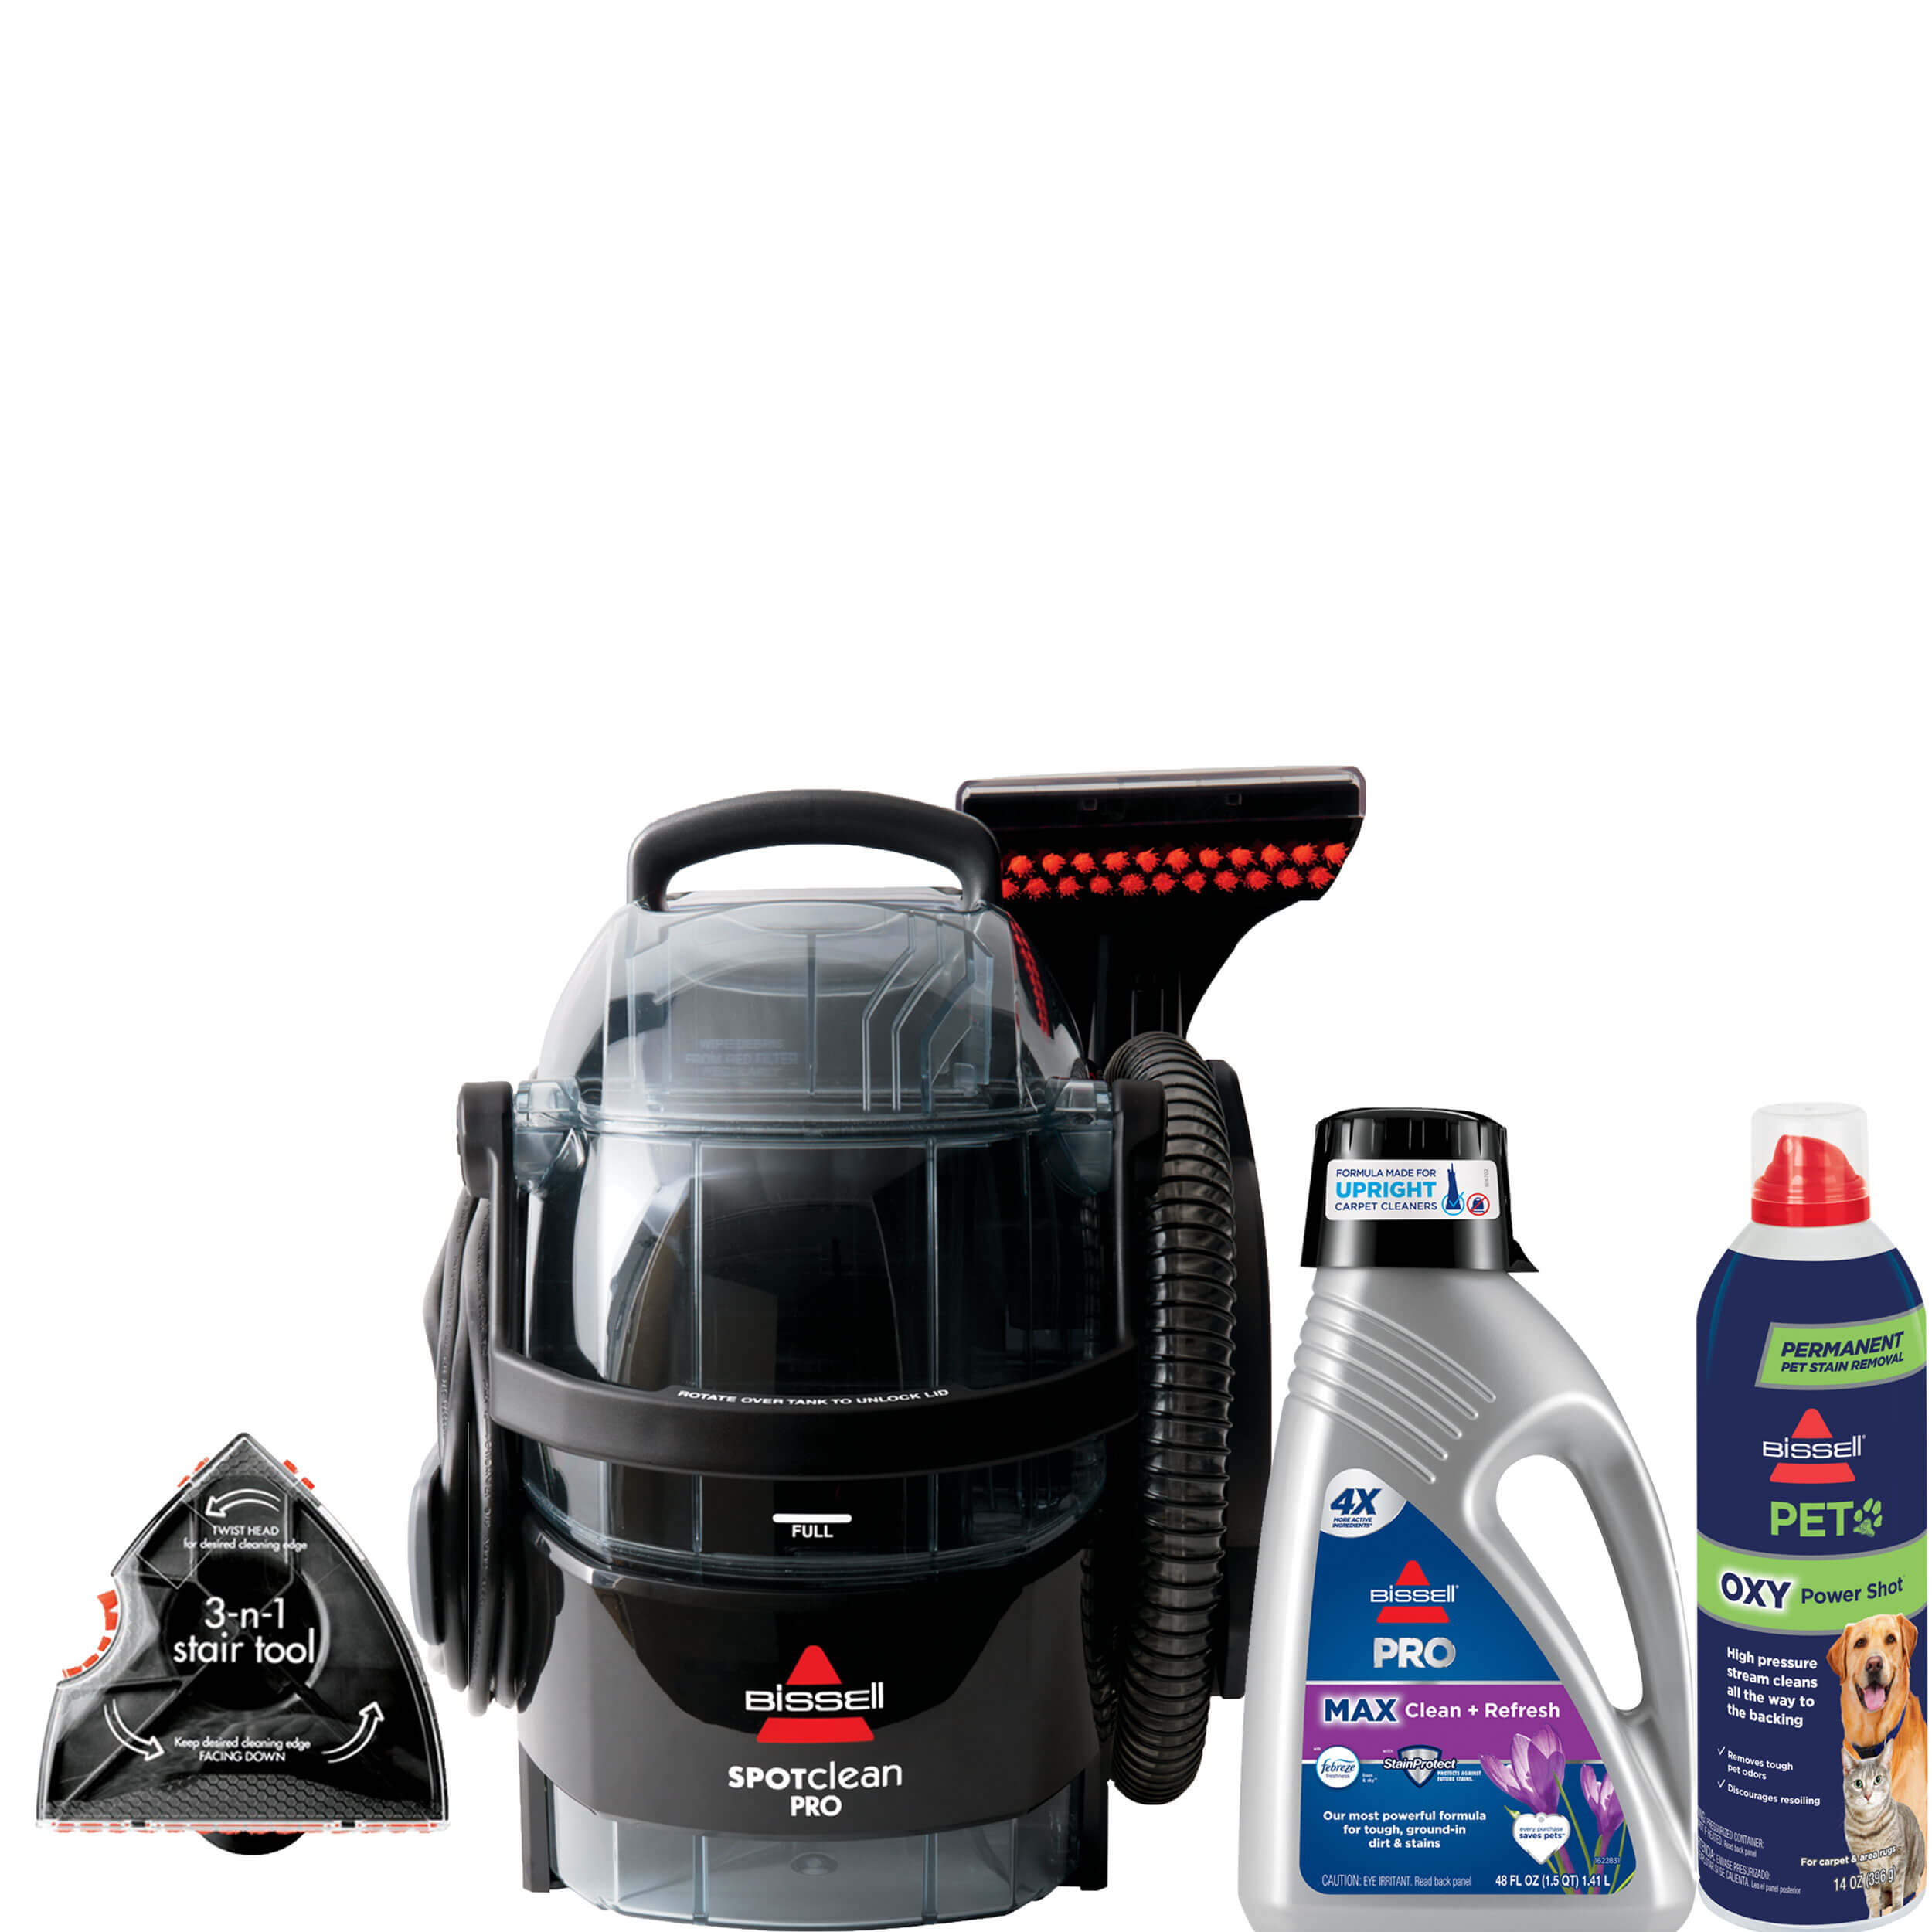 TOP 10 TIPS BISSELL SPOTCLEAN PRO